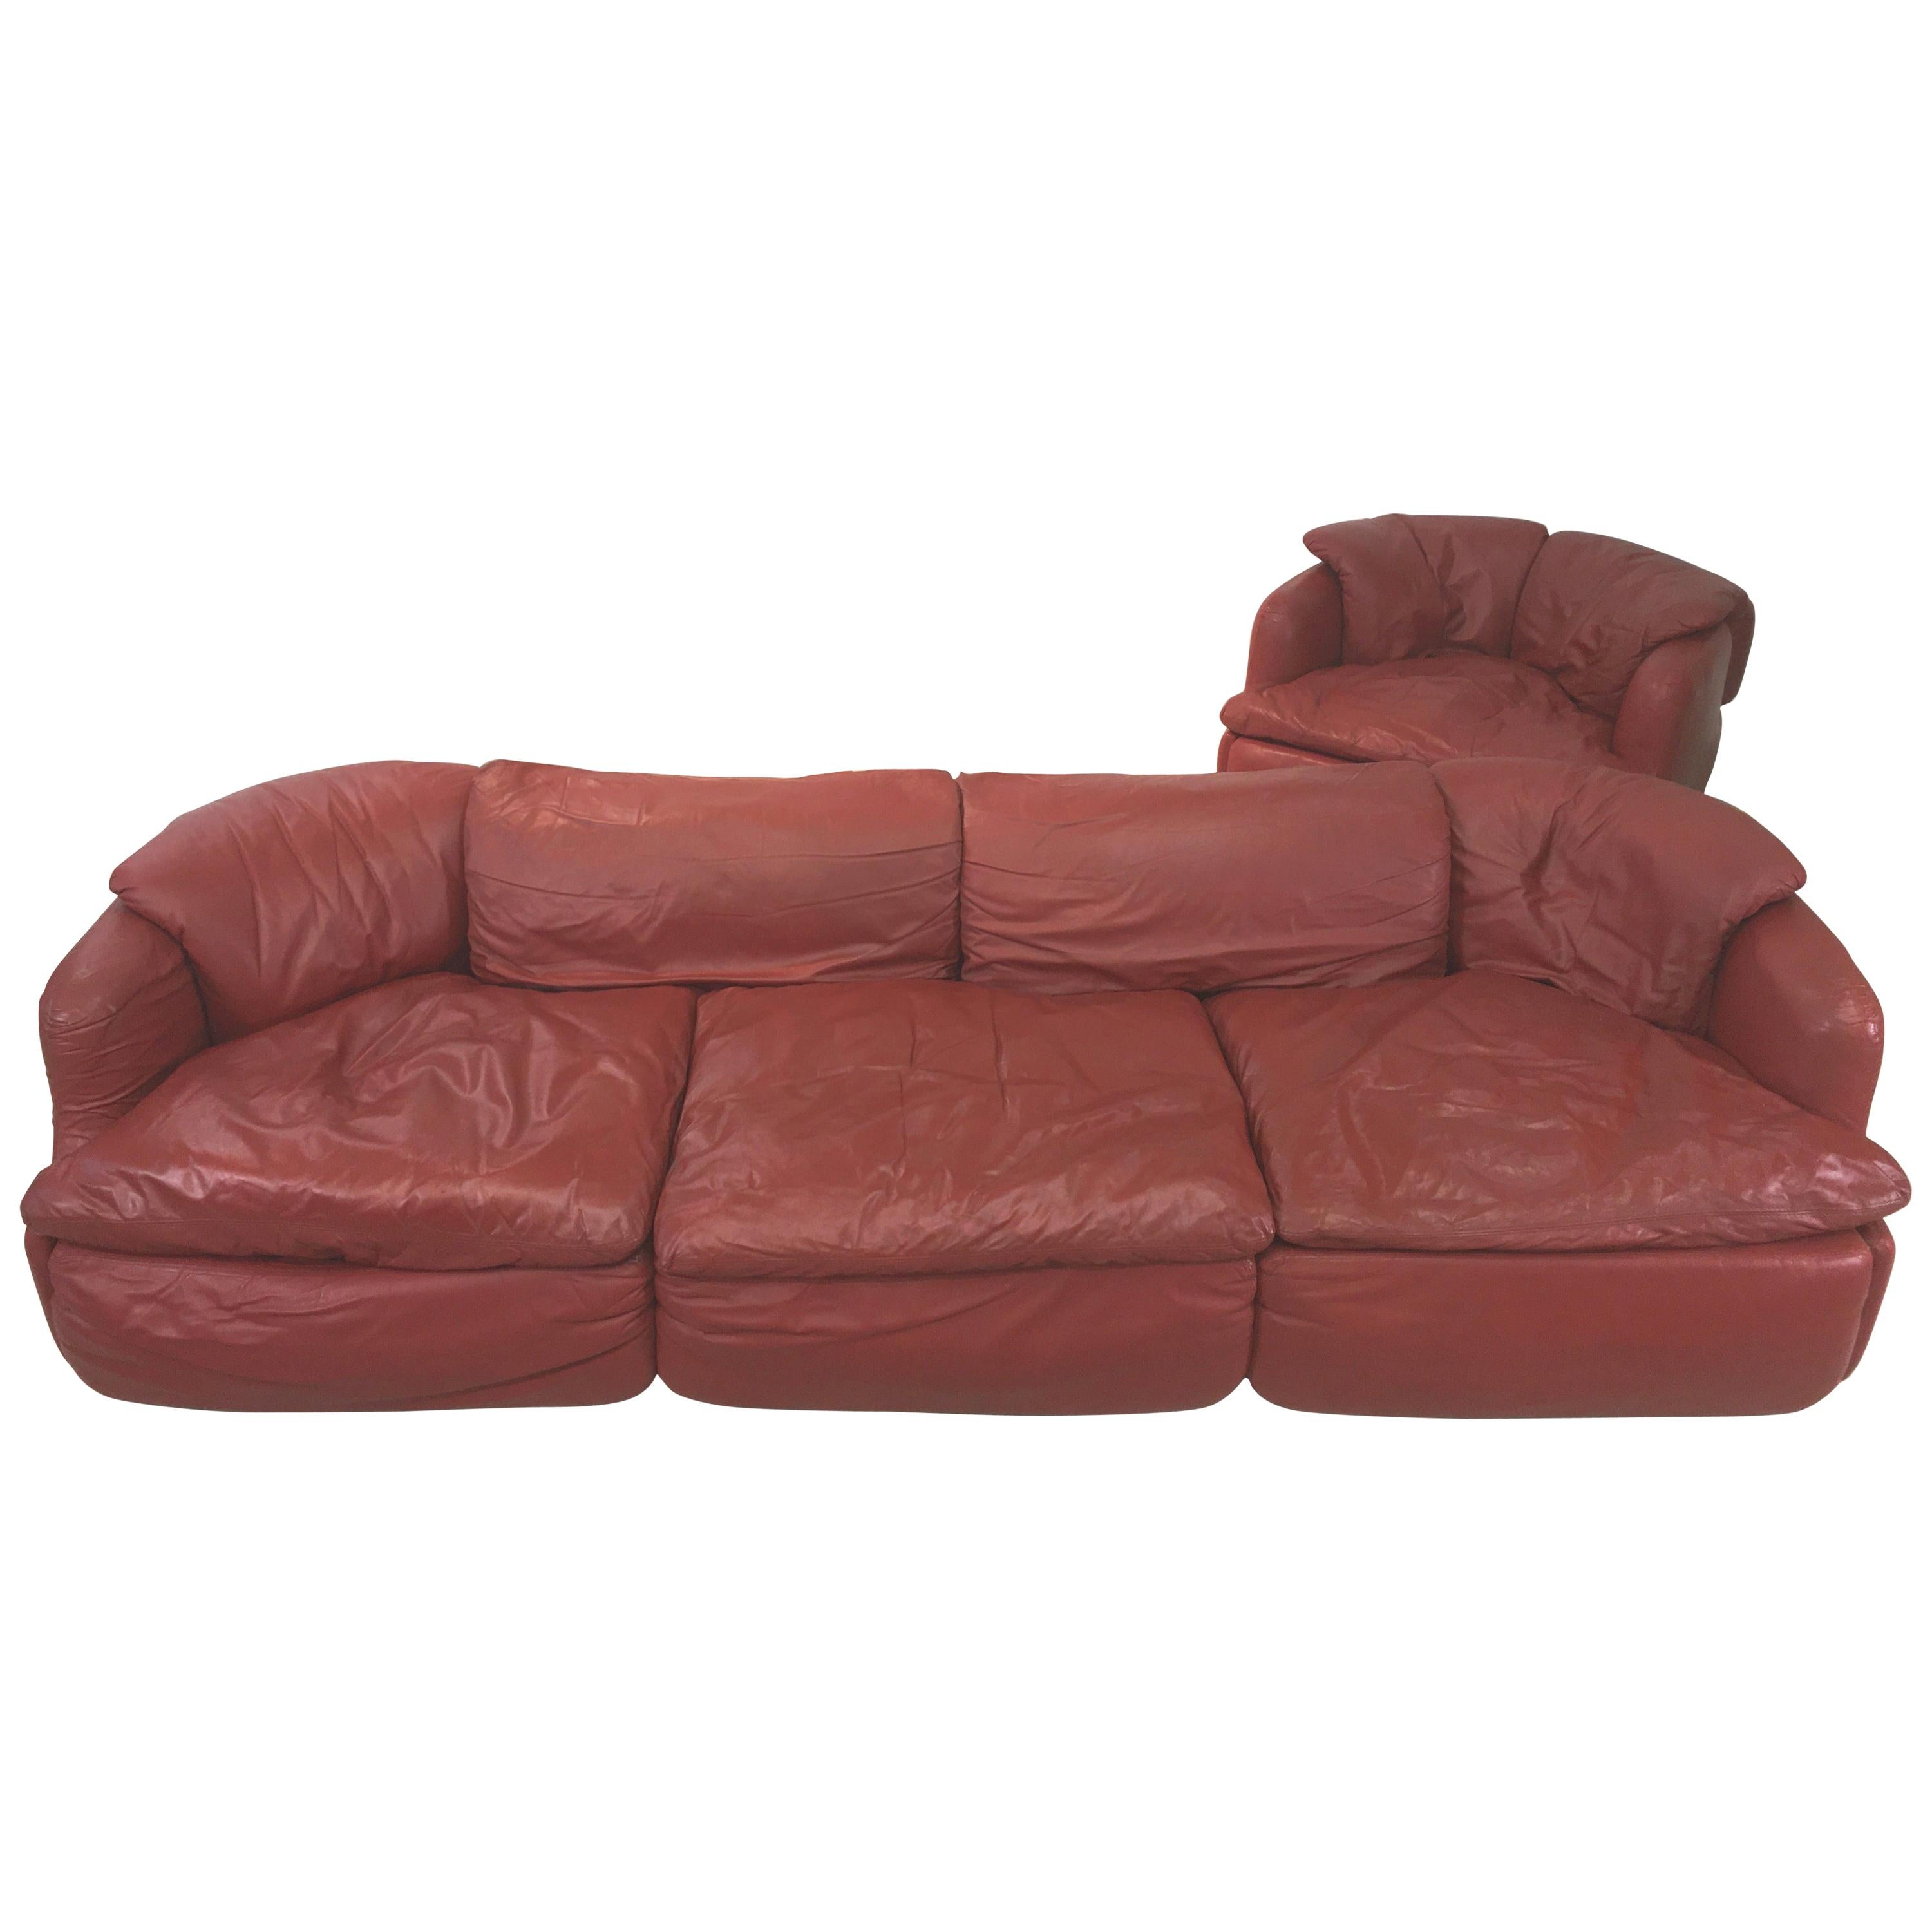 We have one brick red/cordovan leather sofa and matching armchair designed by the Italian architect, Alberto Rosselli in 1972 for Saporiti Italia. Two pieces total. Price shown is for the sofa and the chair together.
The 